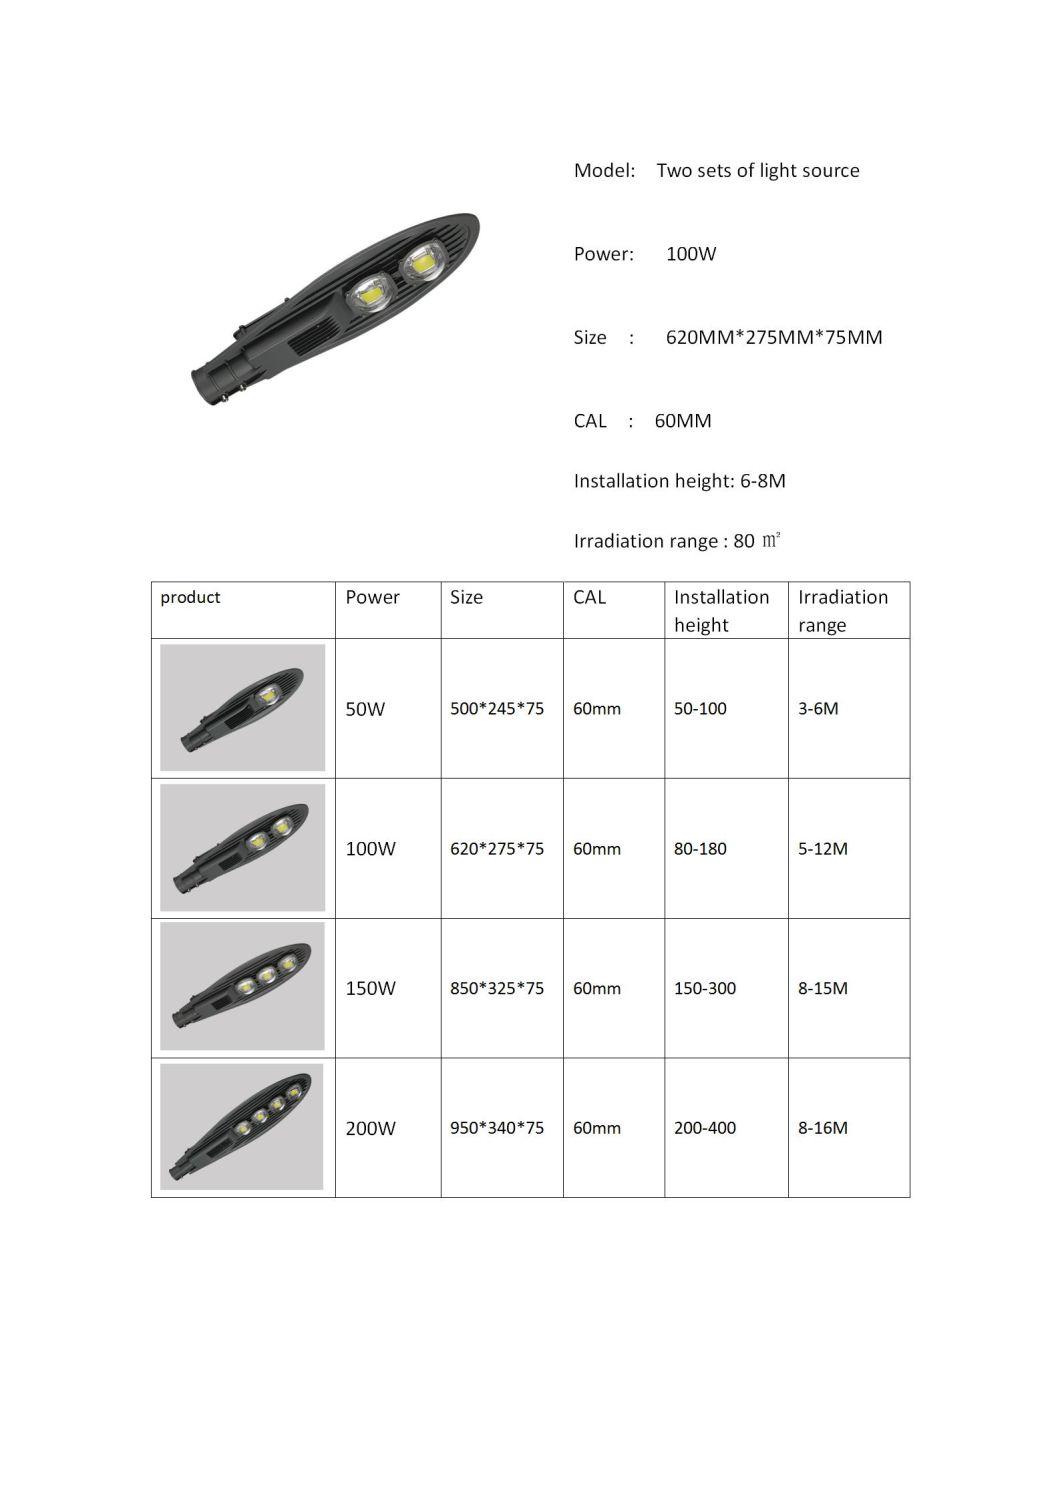 Southeast Asia Favorited Waterproof Outdoor IP66 LED Street Light Decoration